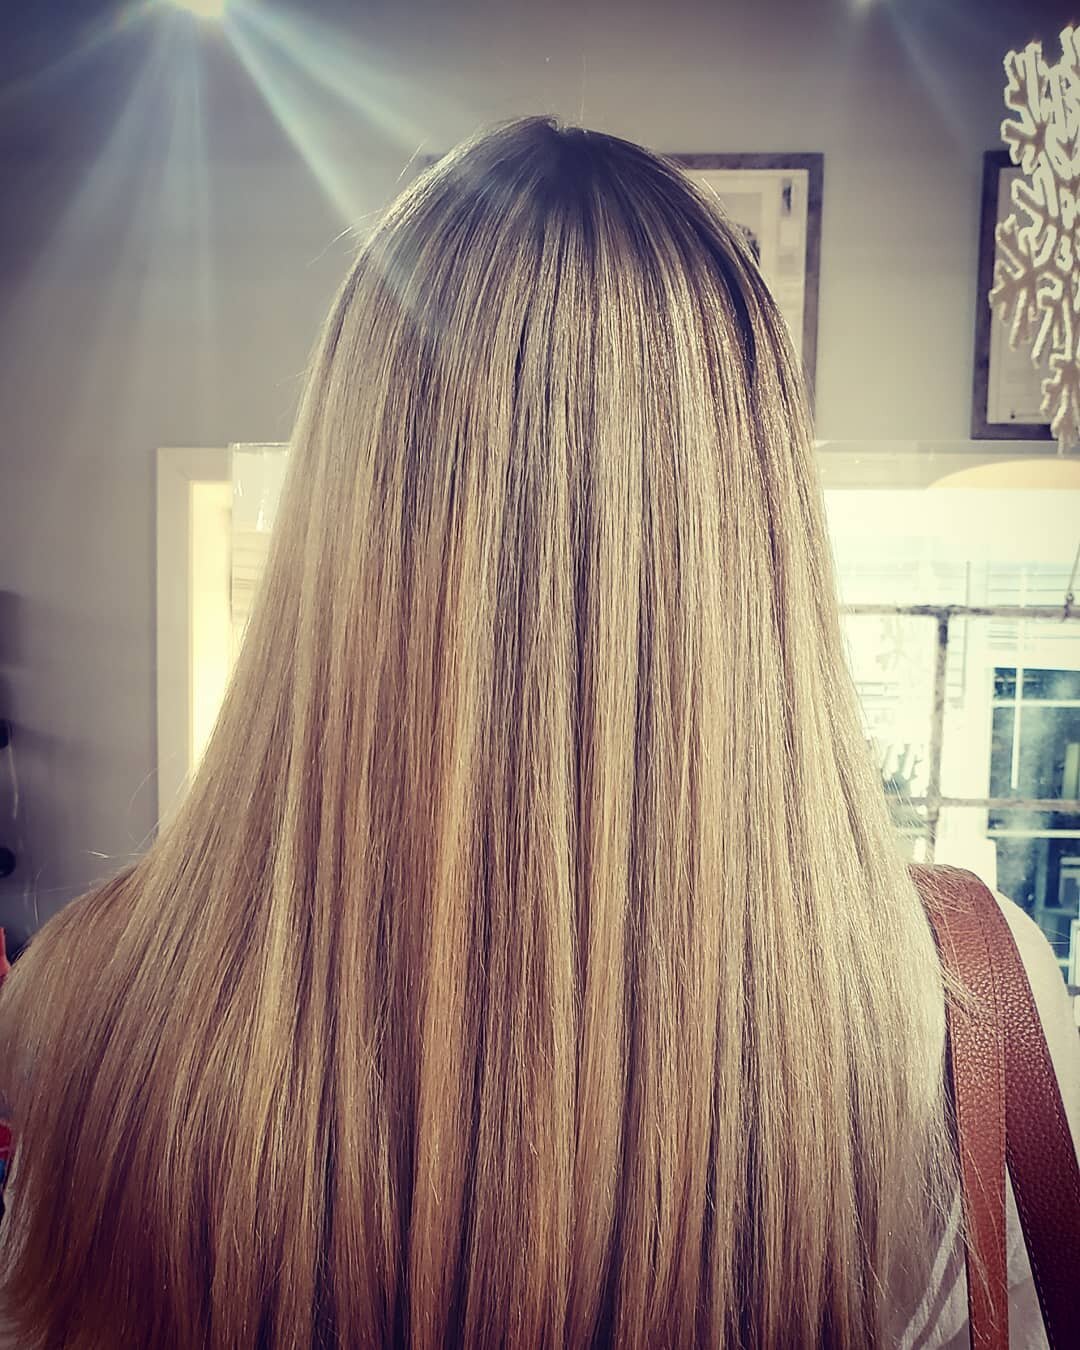 Super icy blonde balayage for this new client!! Welcome to the Boulevard!